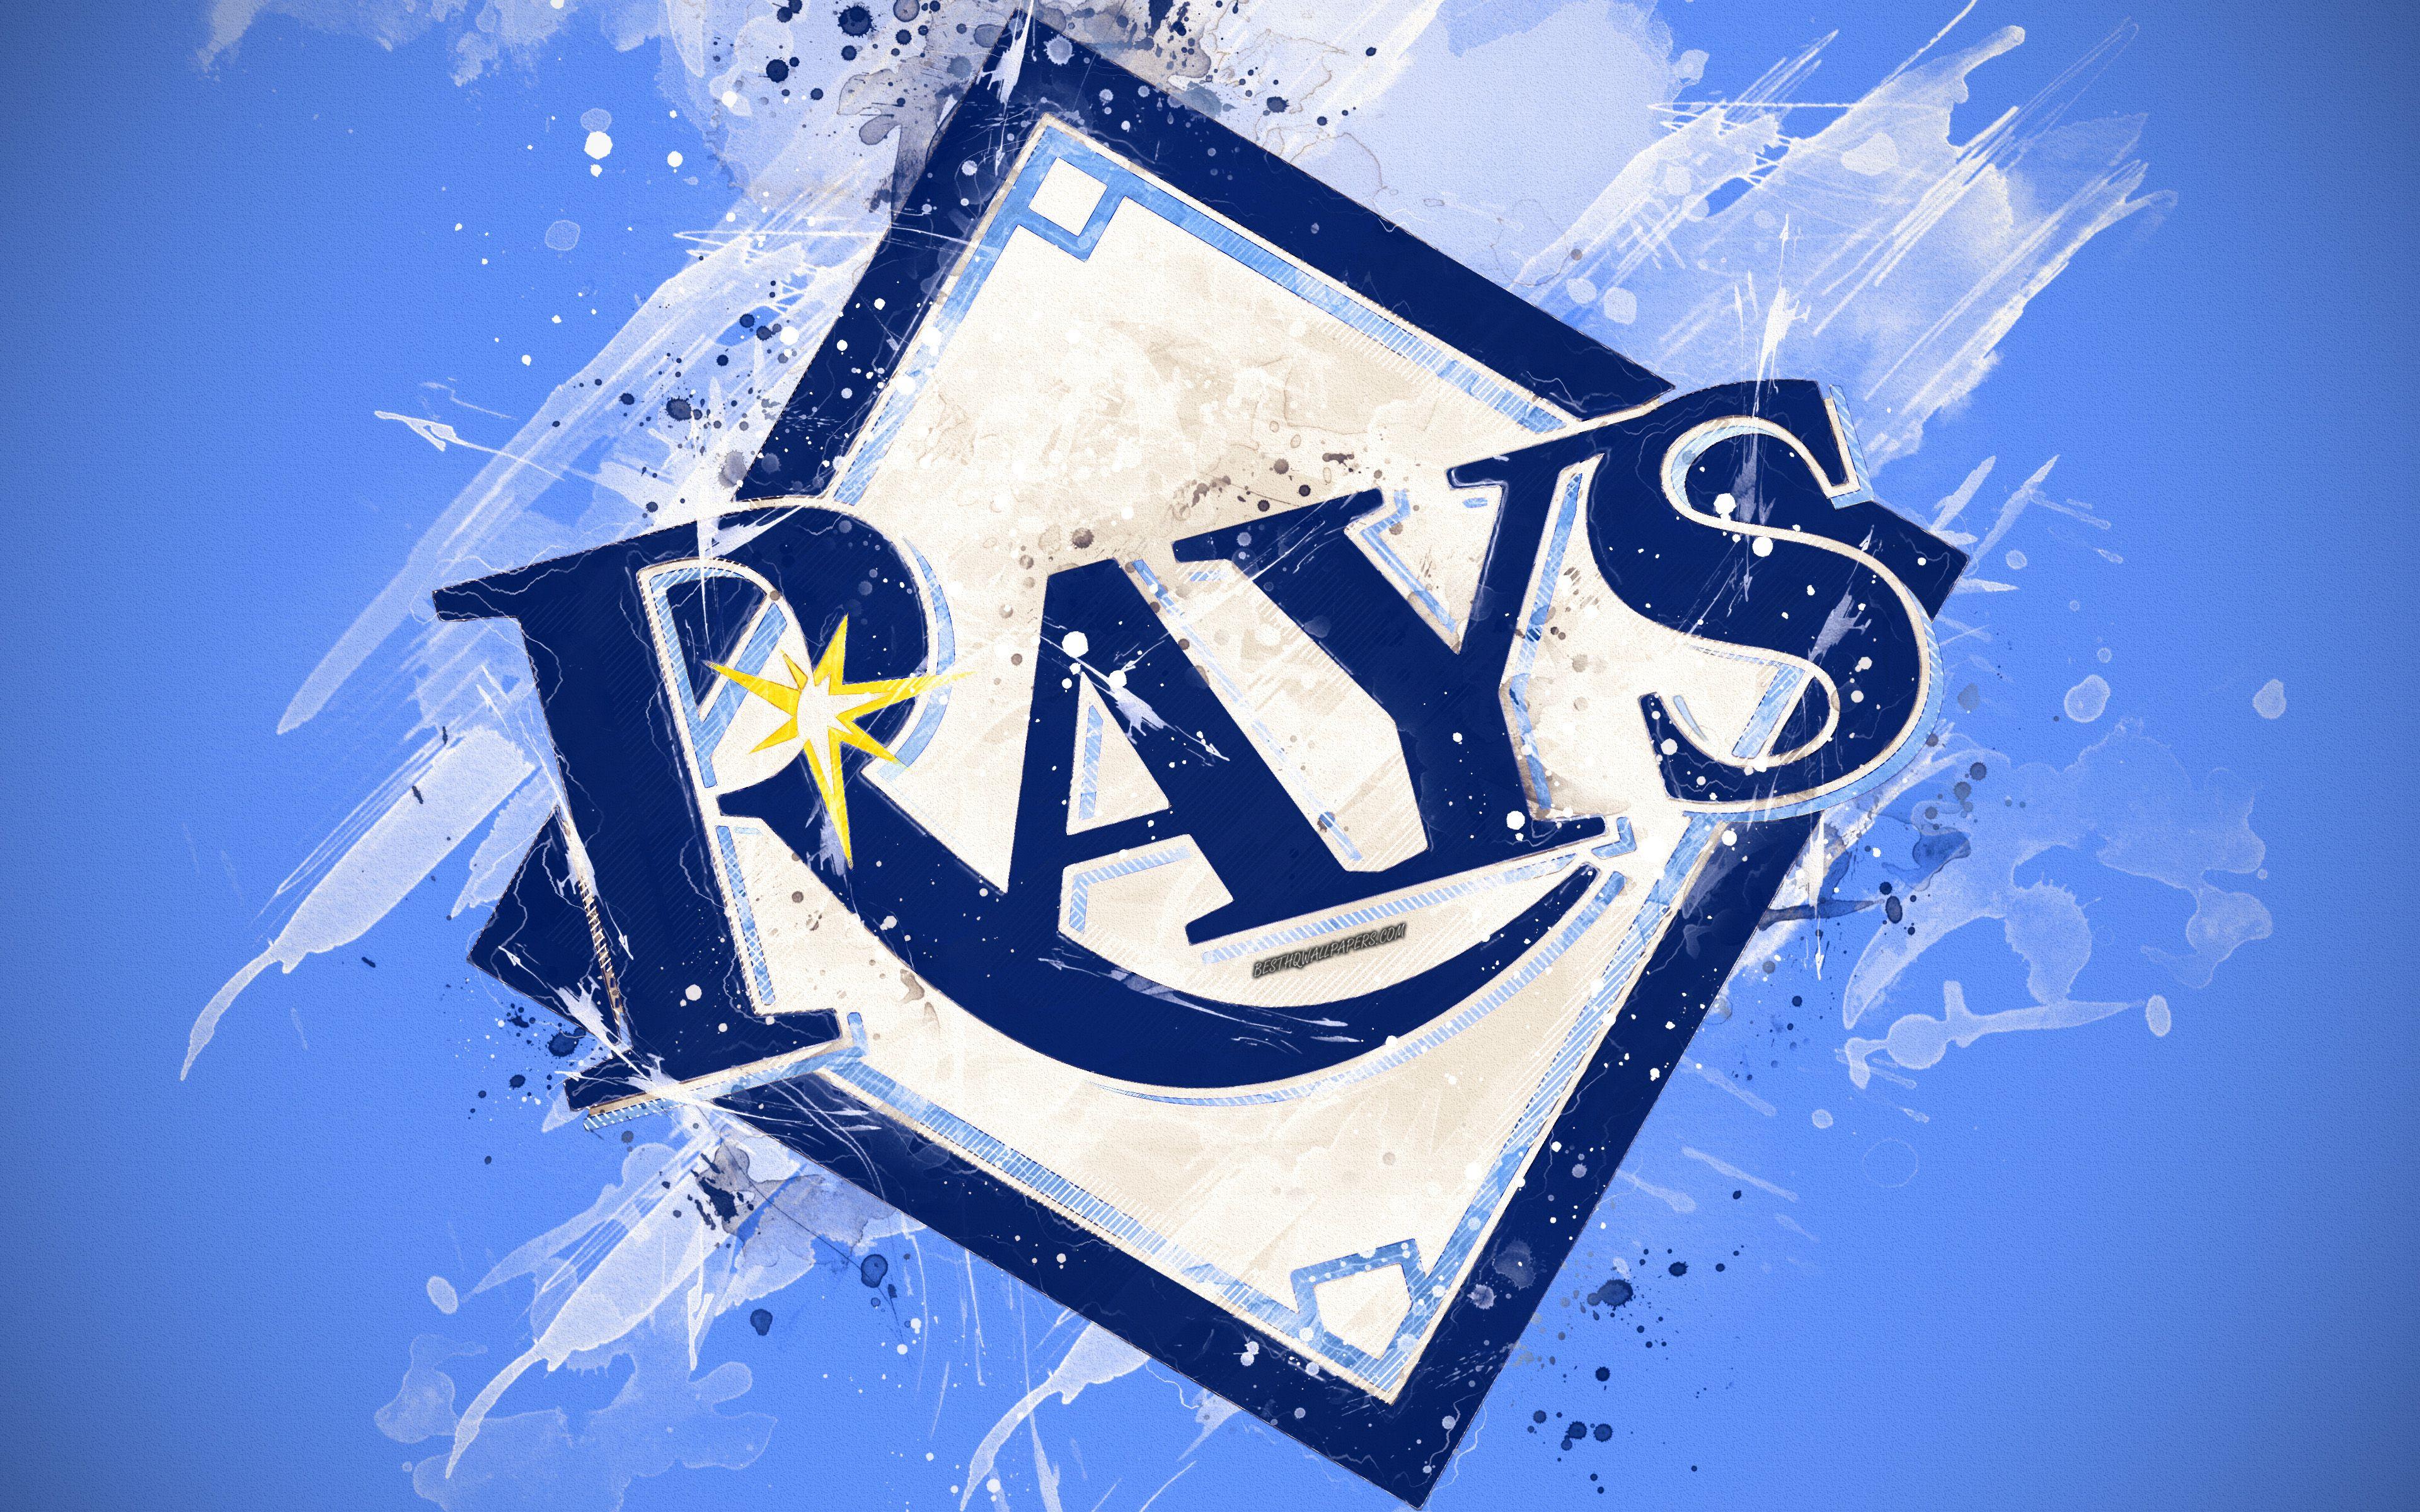 Tampa Bay Rays Scores